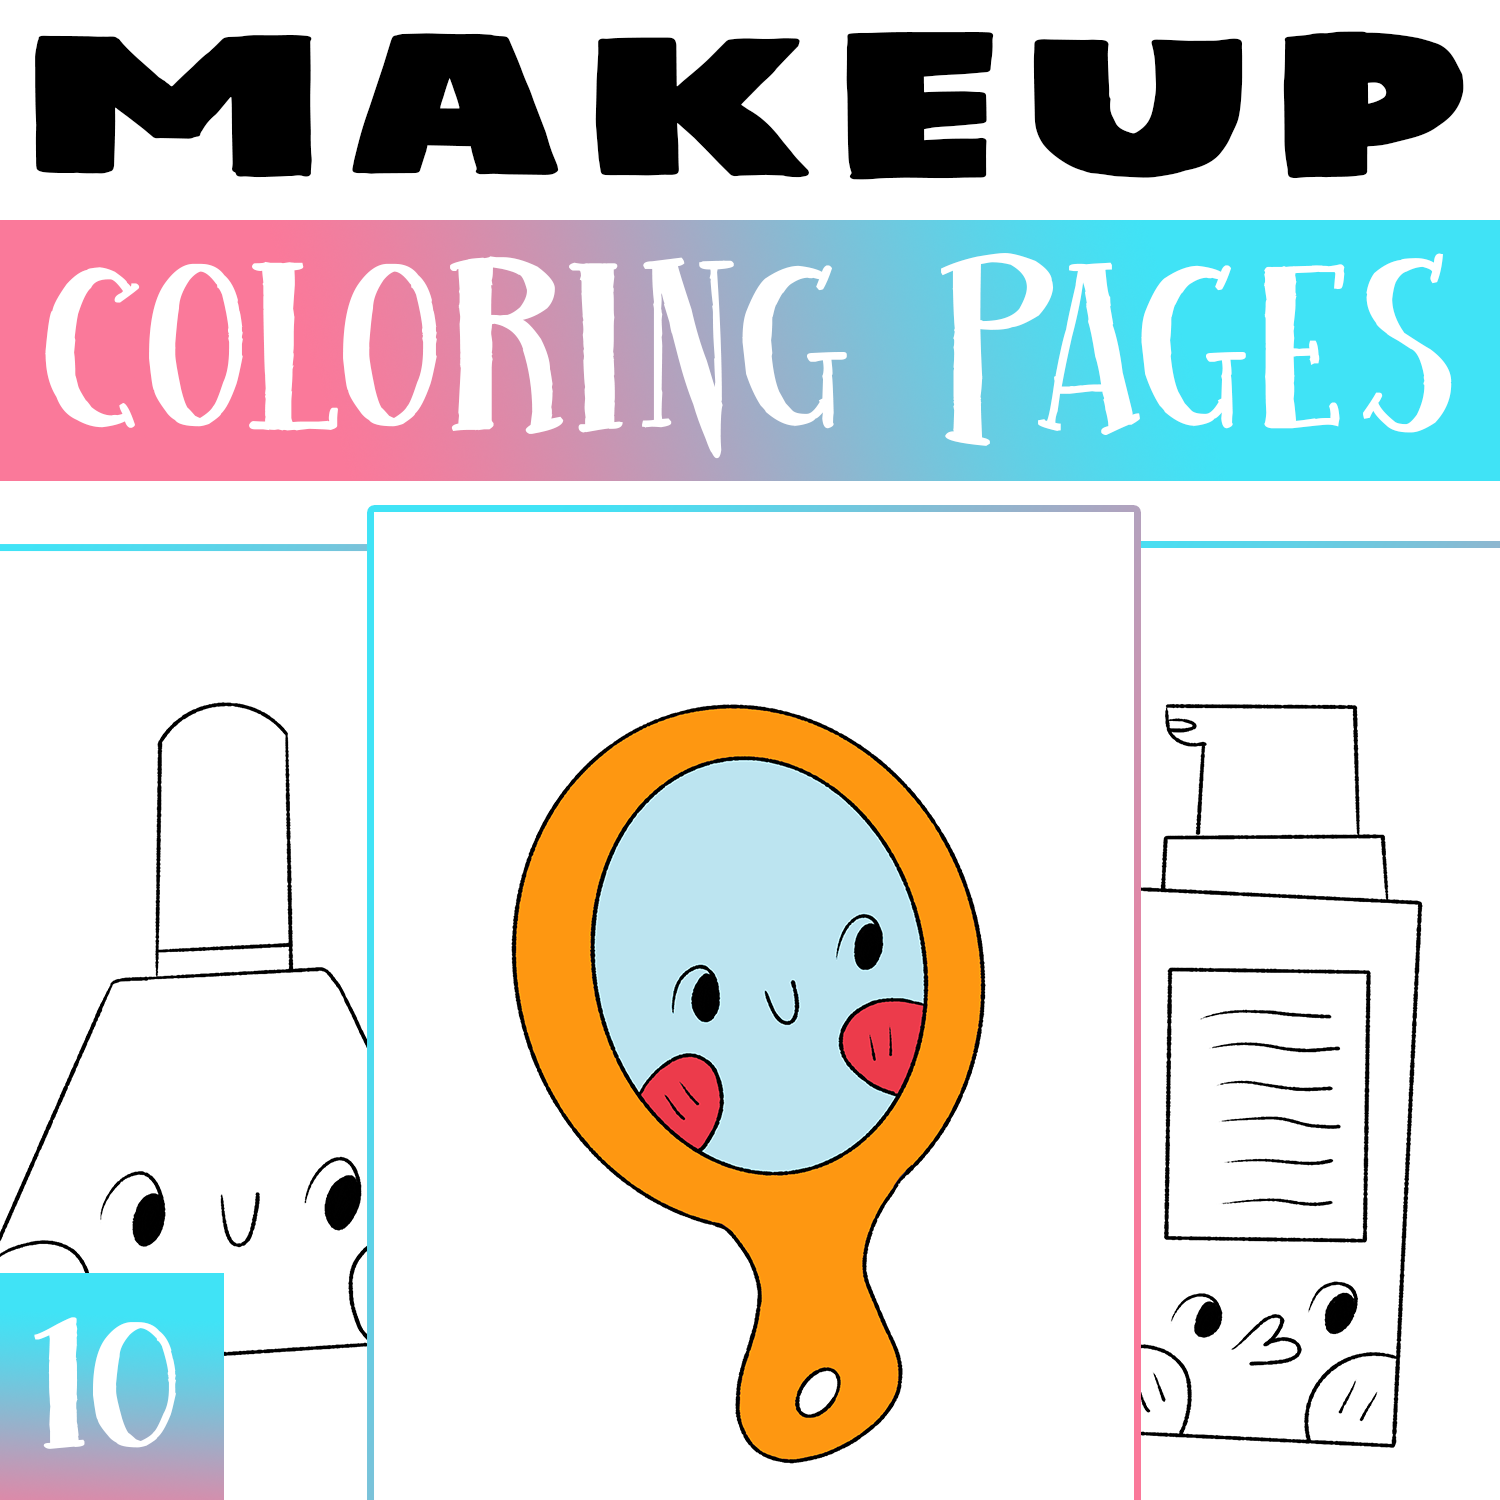 Makeup coloring pages makeup coloring worksheet activity morning works made by teachers